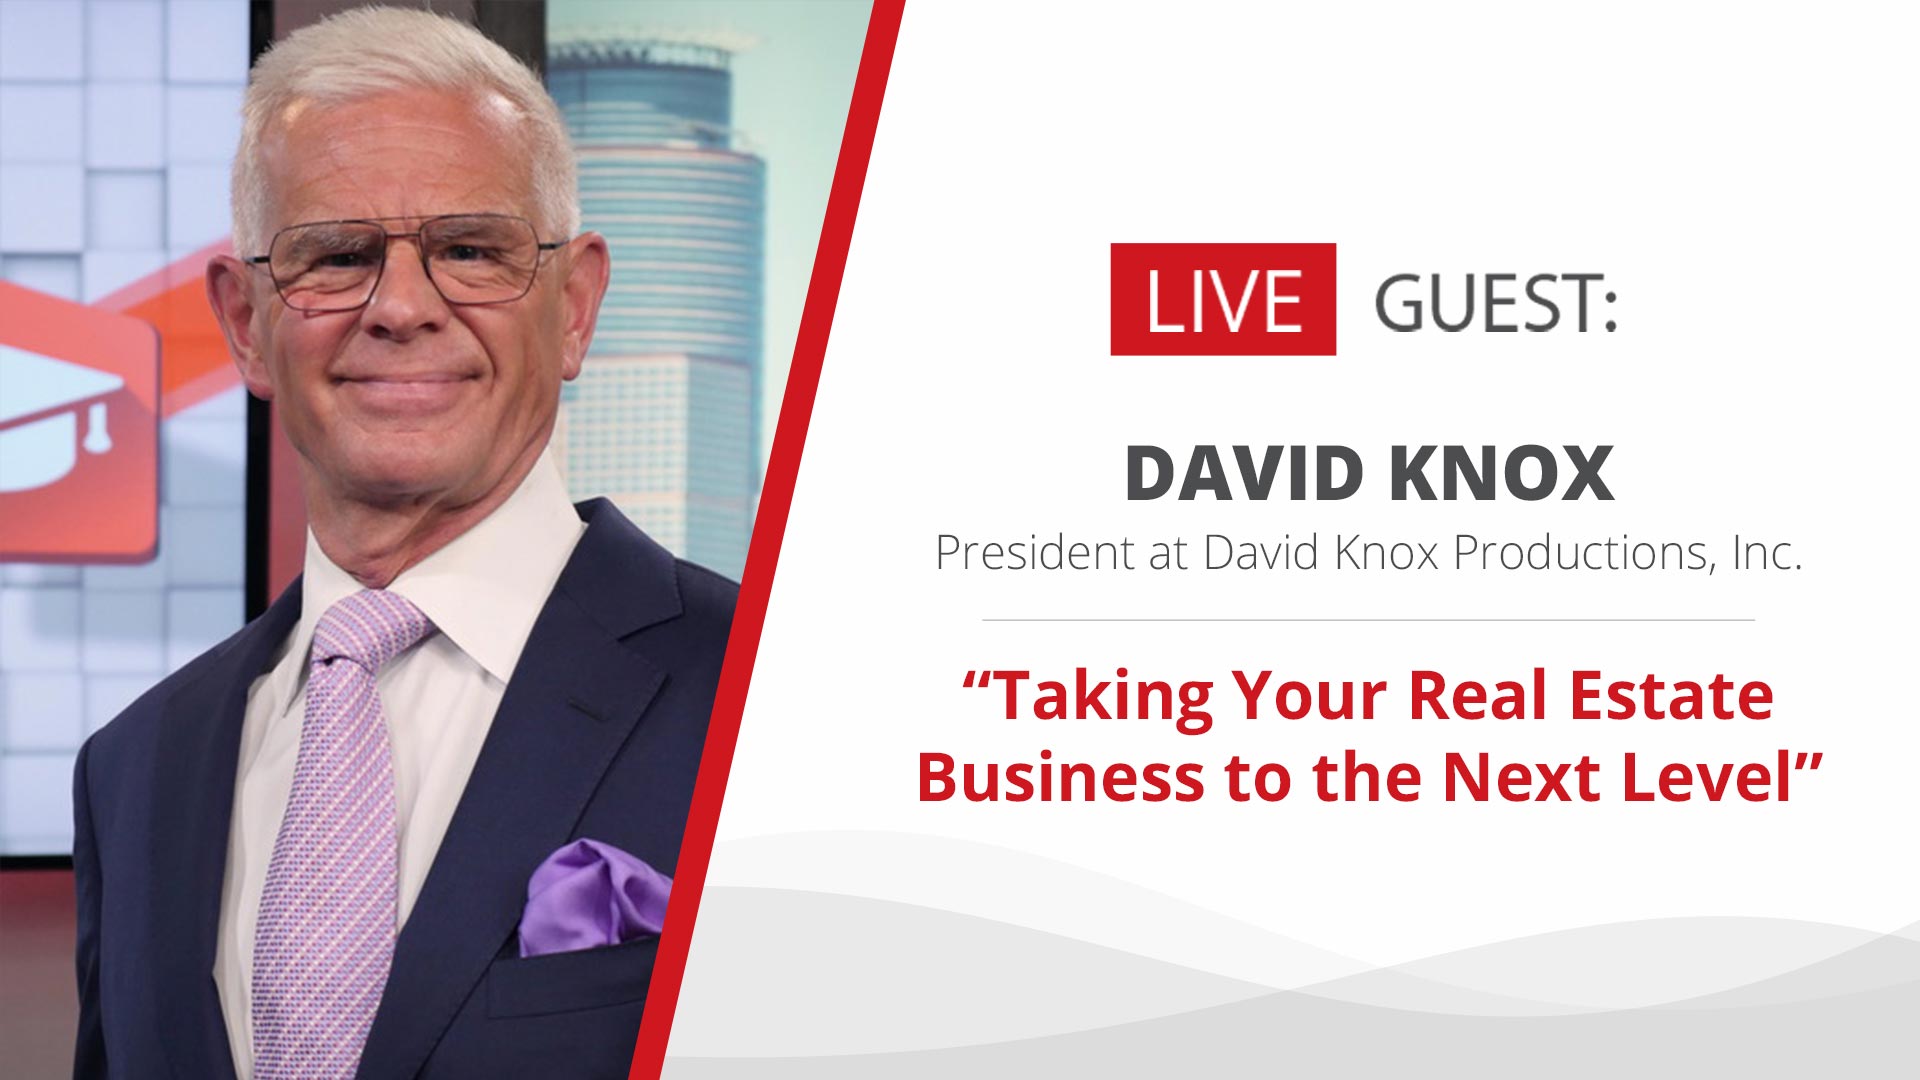 David Knox | Taking your real estate business to the next level